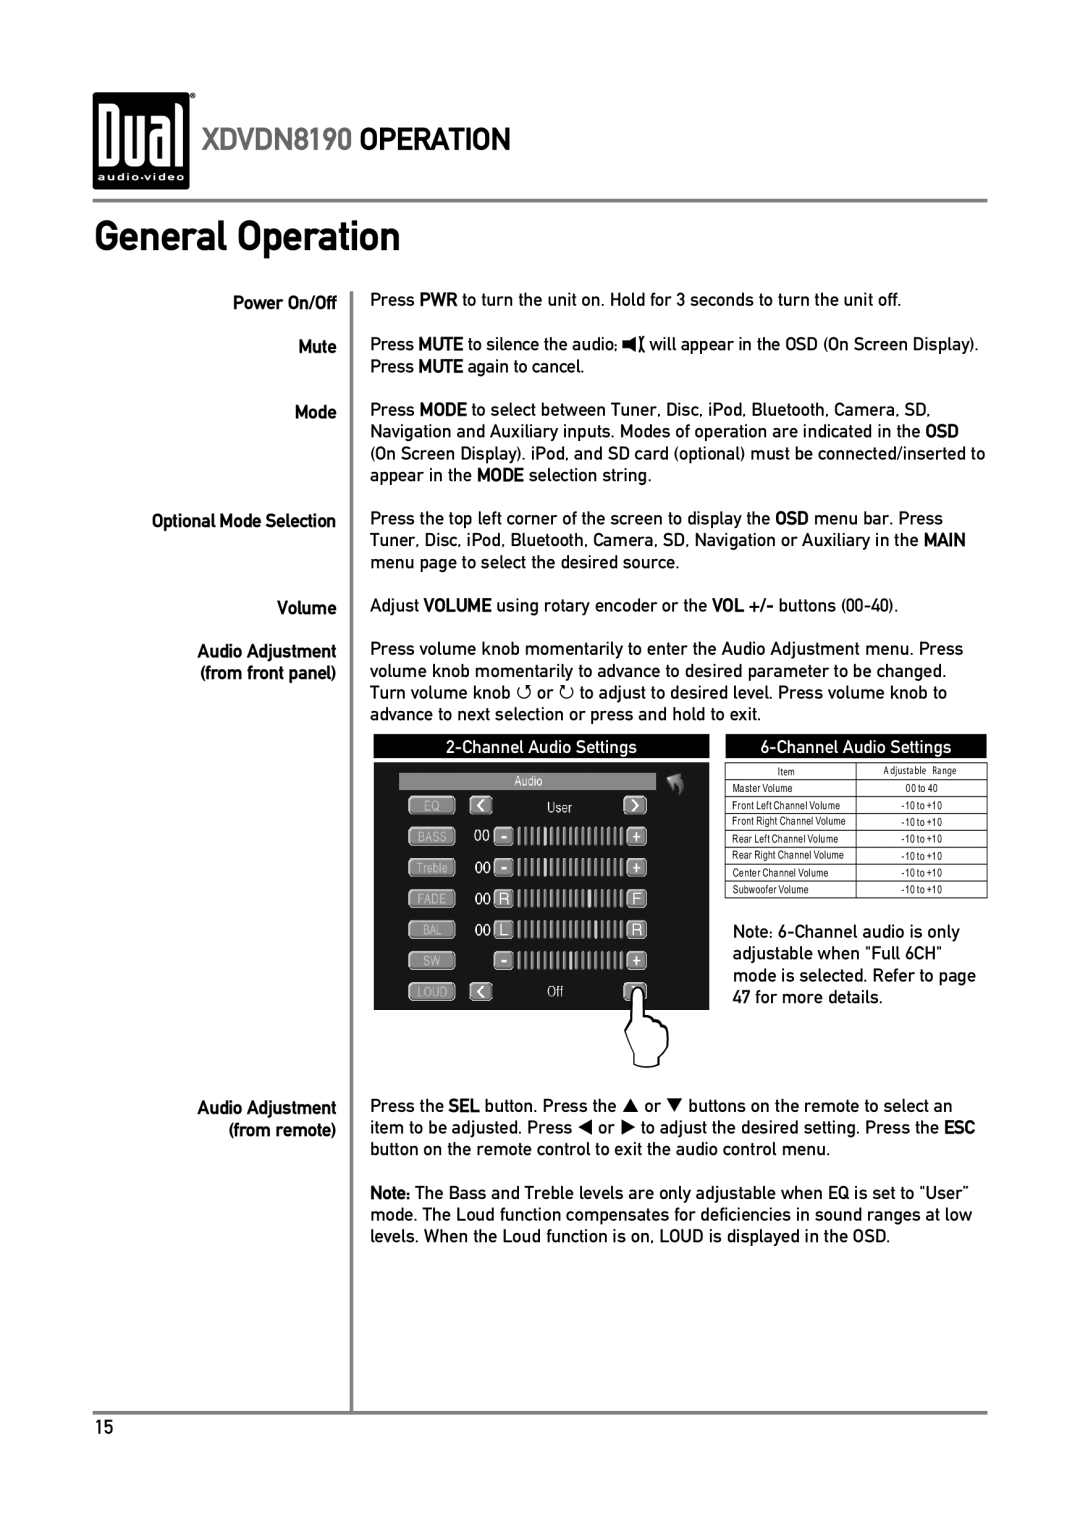 Dual owner manual General Operation, XDVDN8190 OPERATION, Power On/Off Mute Mode, Volume 